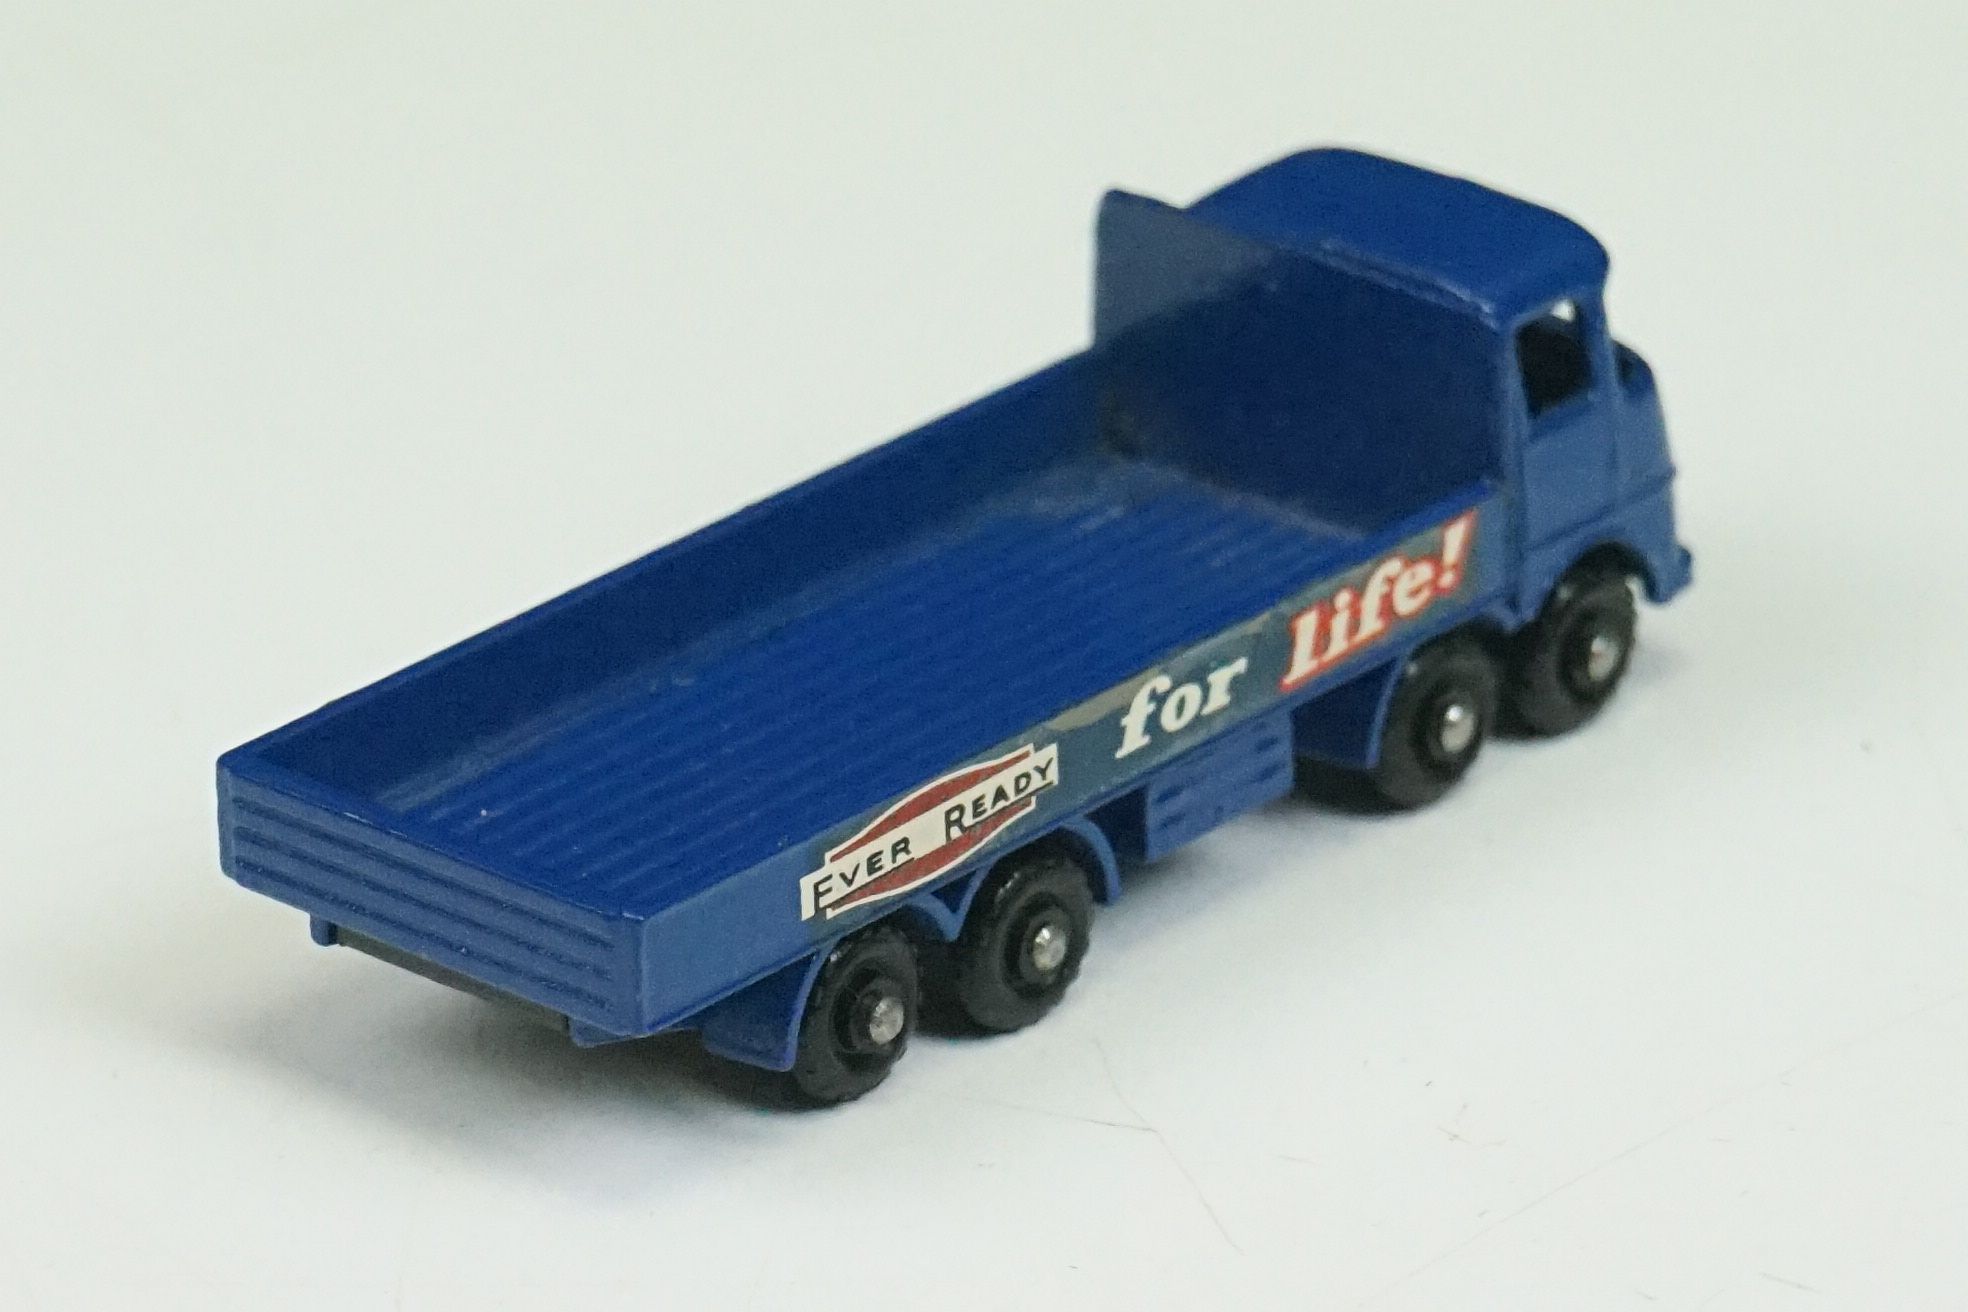 Three boxed Matchbox Lesney diecast models to include 20 Ever Ready Transport Truck, 62 TV Service - Image 17 of 21